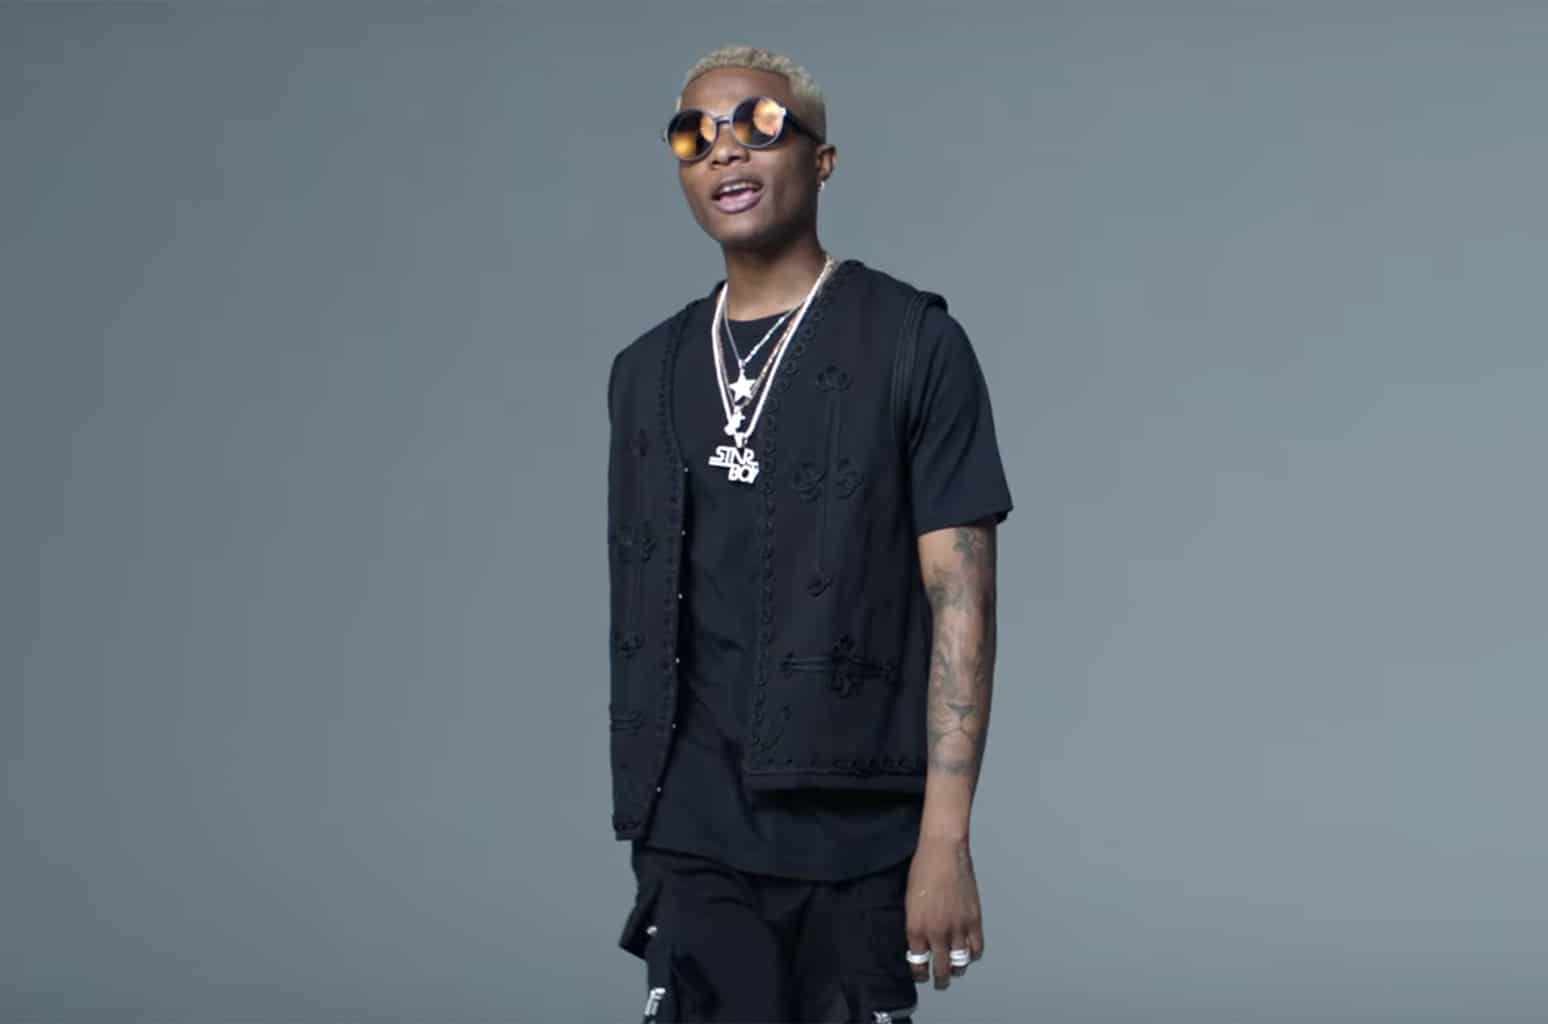 Wizkid Net Worth, House, Cars, and Biography